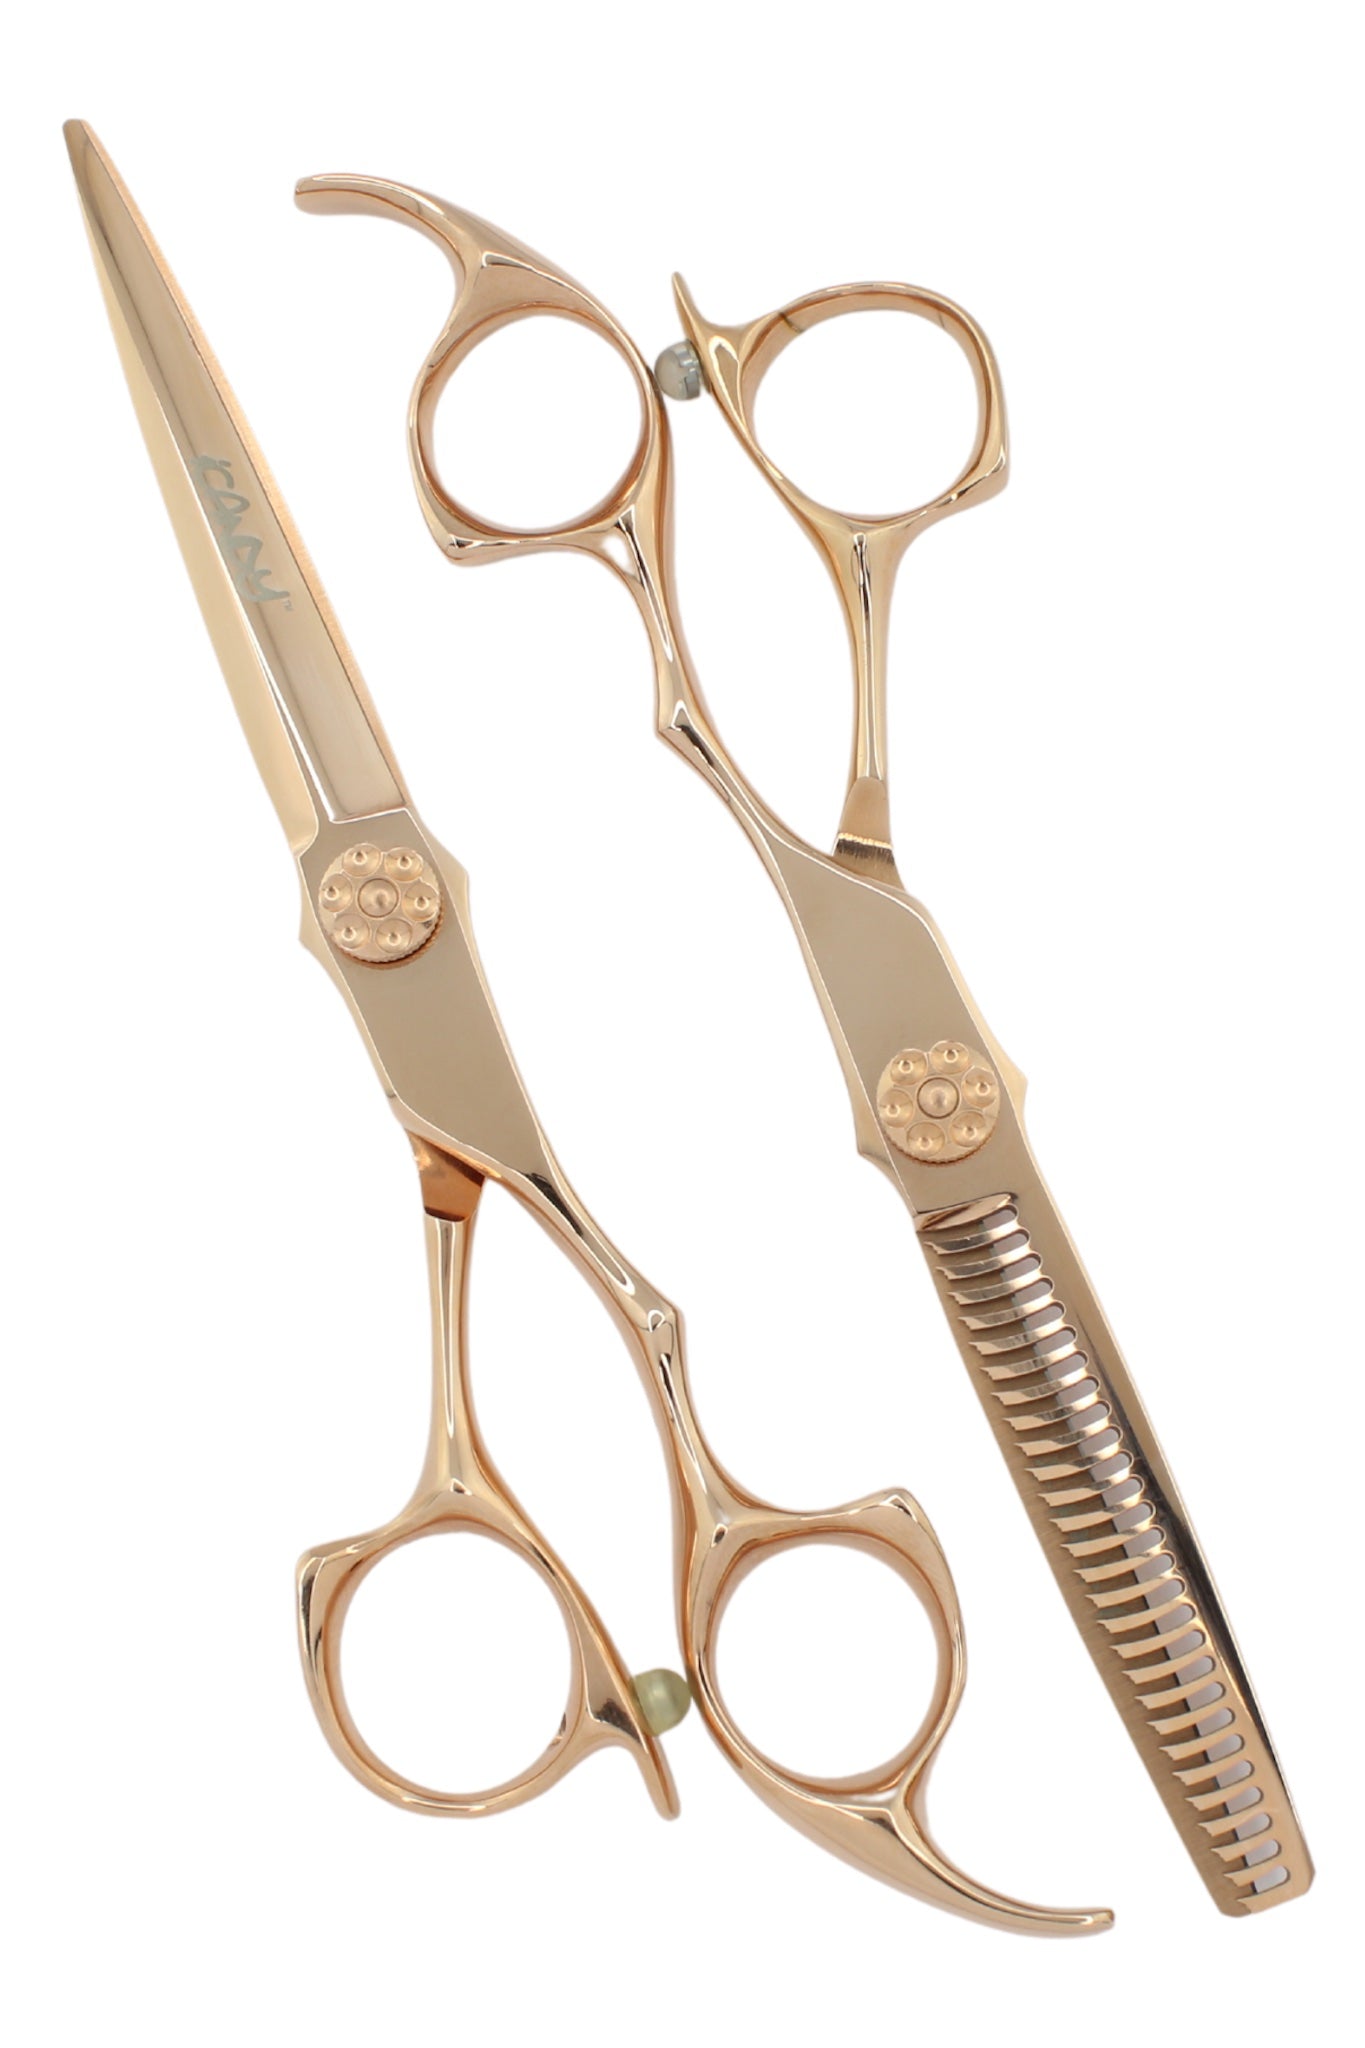 iCandy ALL STAR Rose Gold Scissor-Thinner Bundle 6.5/6.0 inch